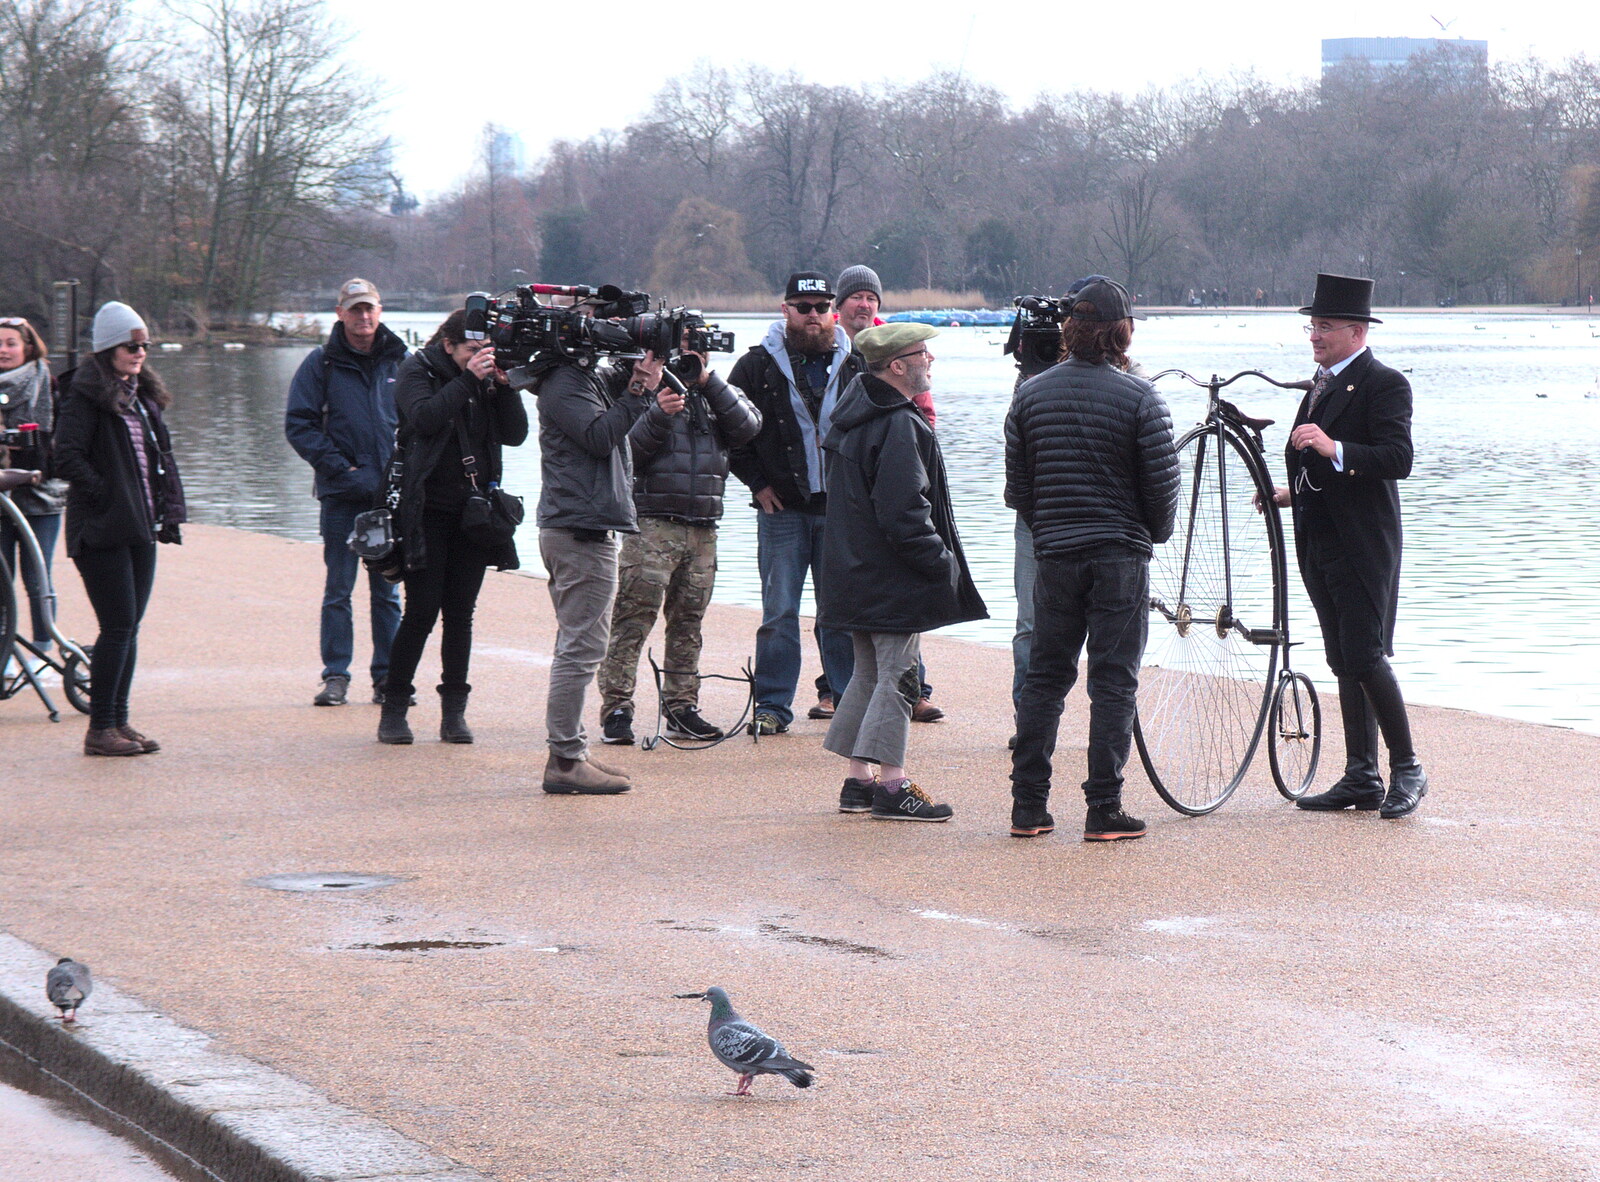 Some mad filming occurs in Hyde Park from The End of the Beast (From the East), Brome, Suffolk - 4th March 2018